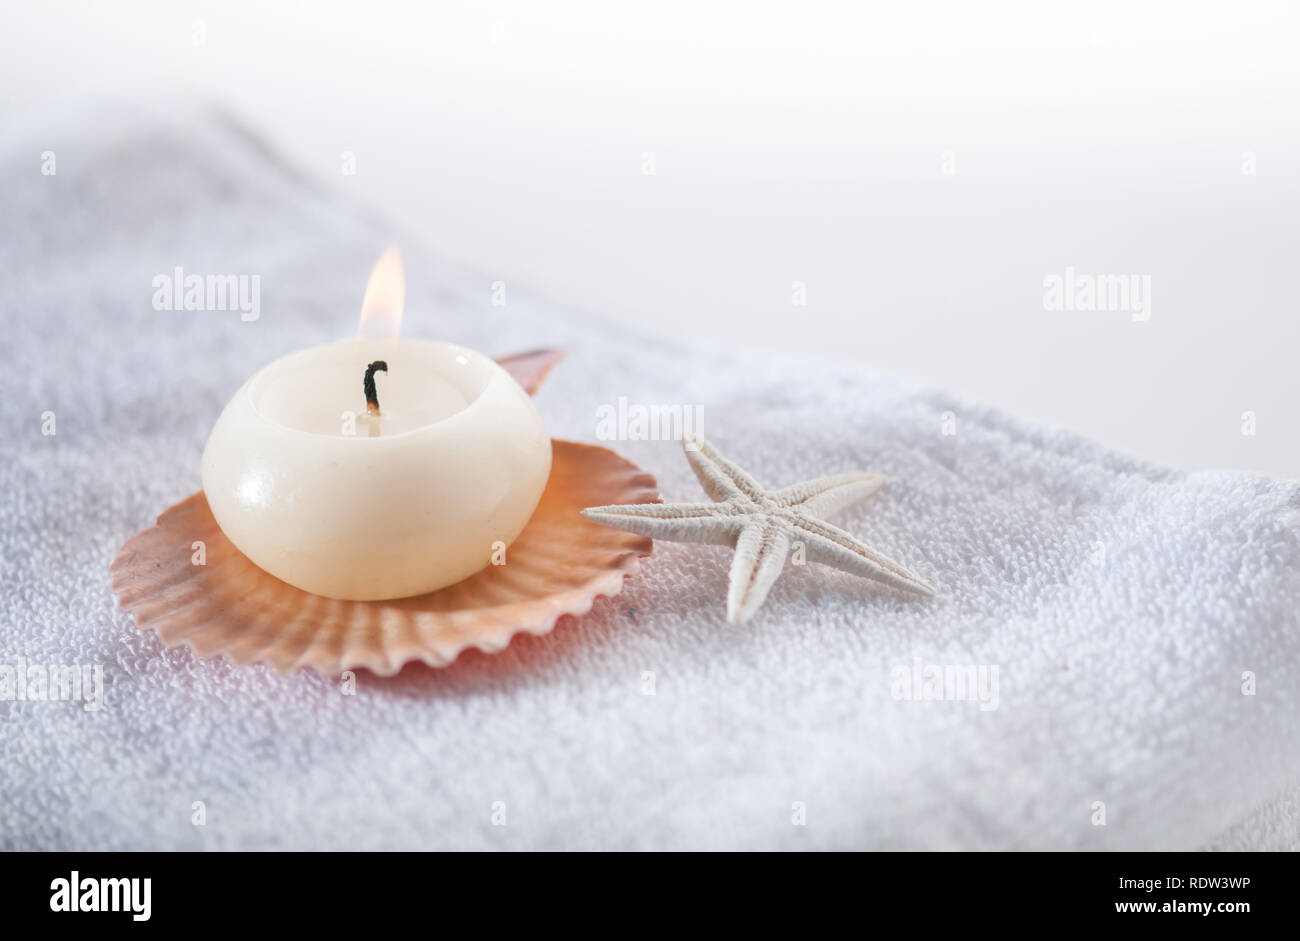 Lit-up candle with natural shells placed on white towel. Stock Photo